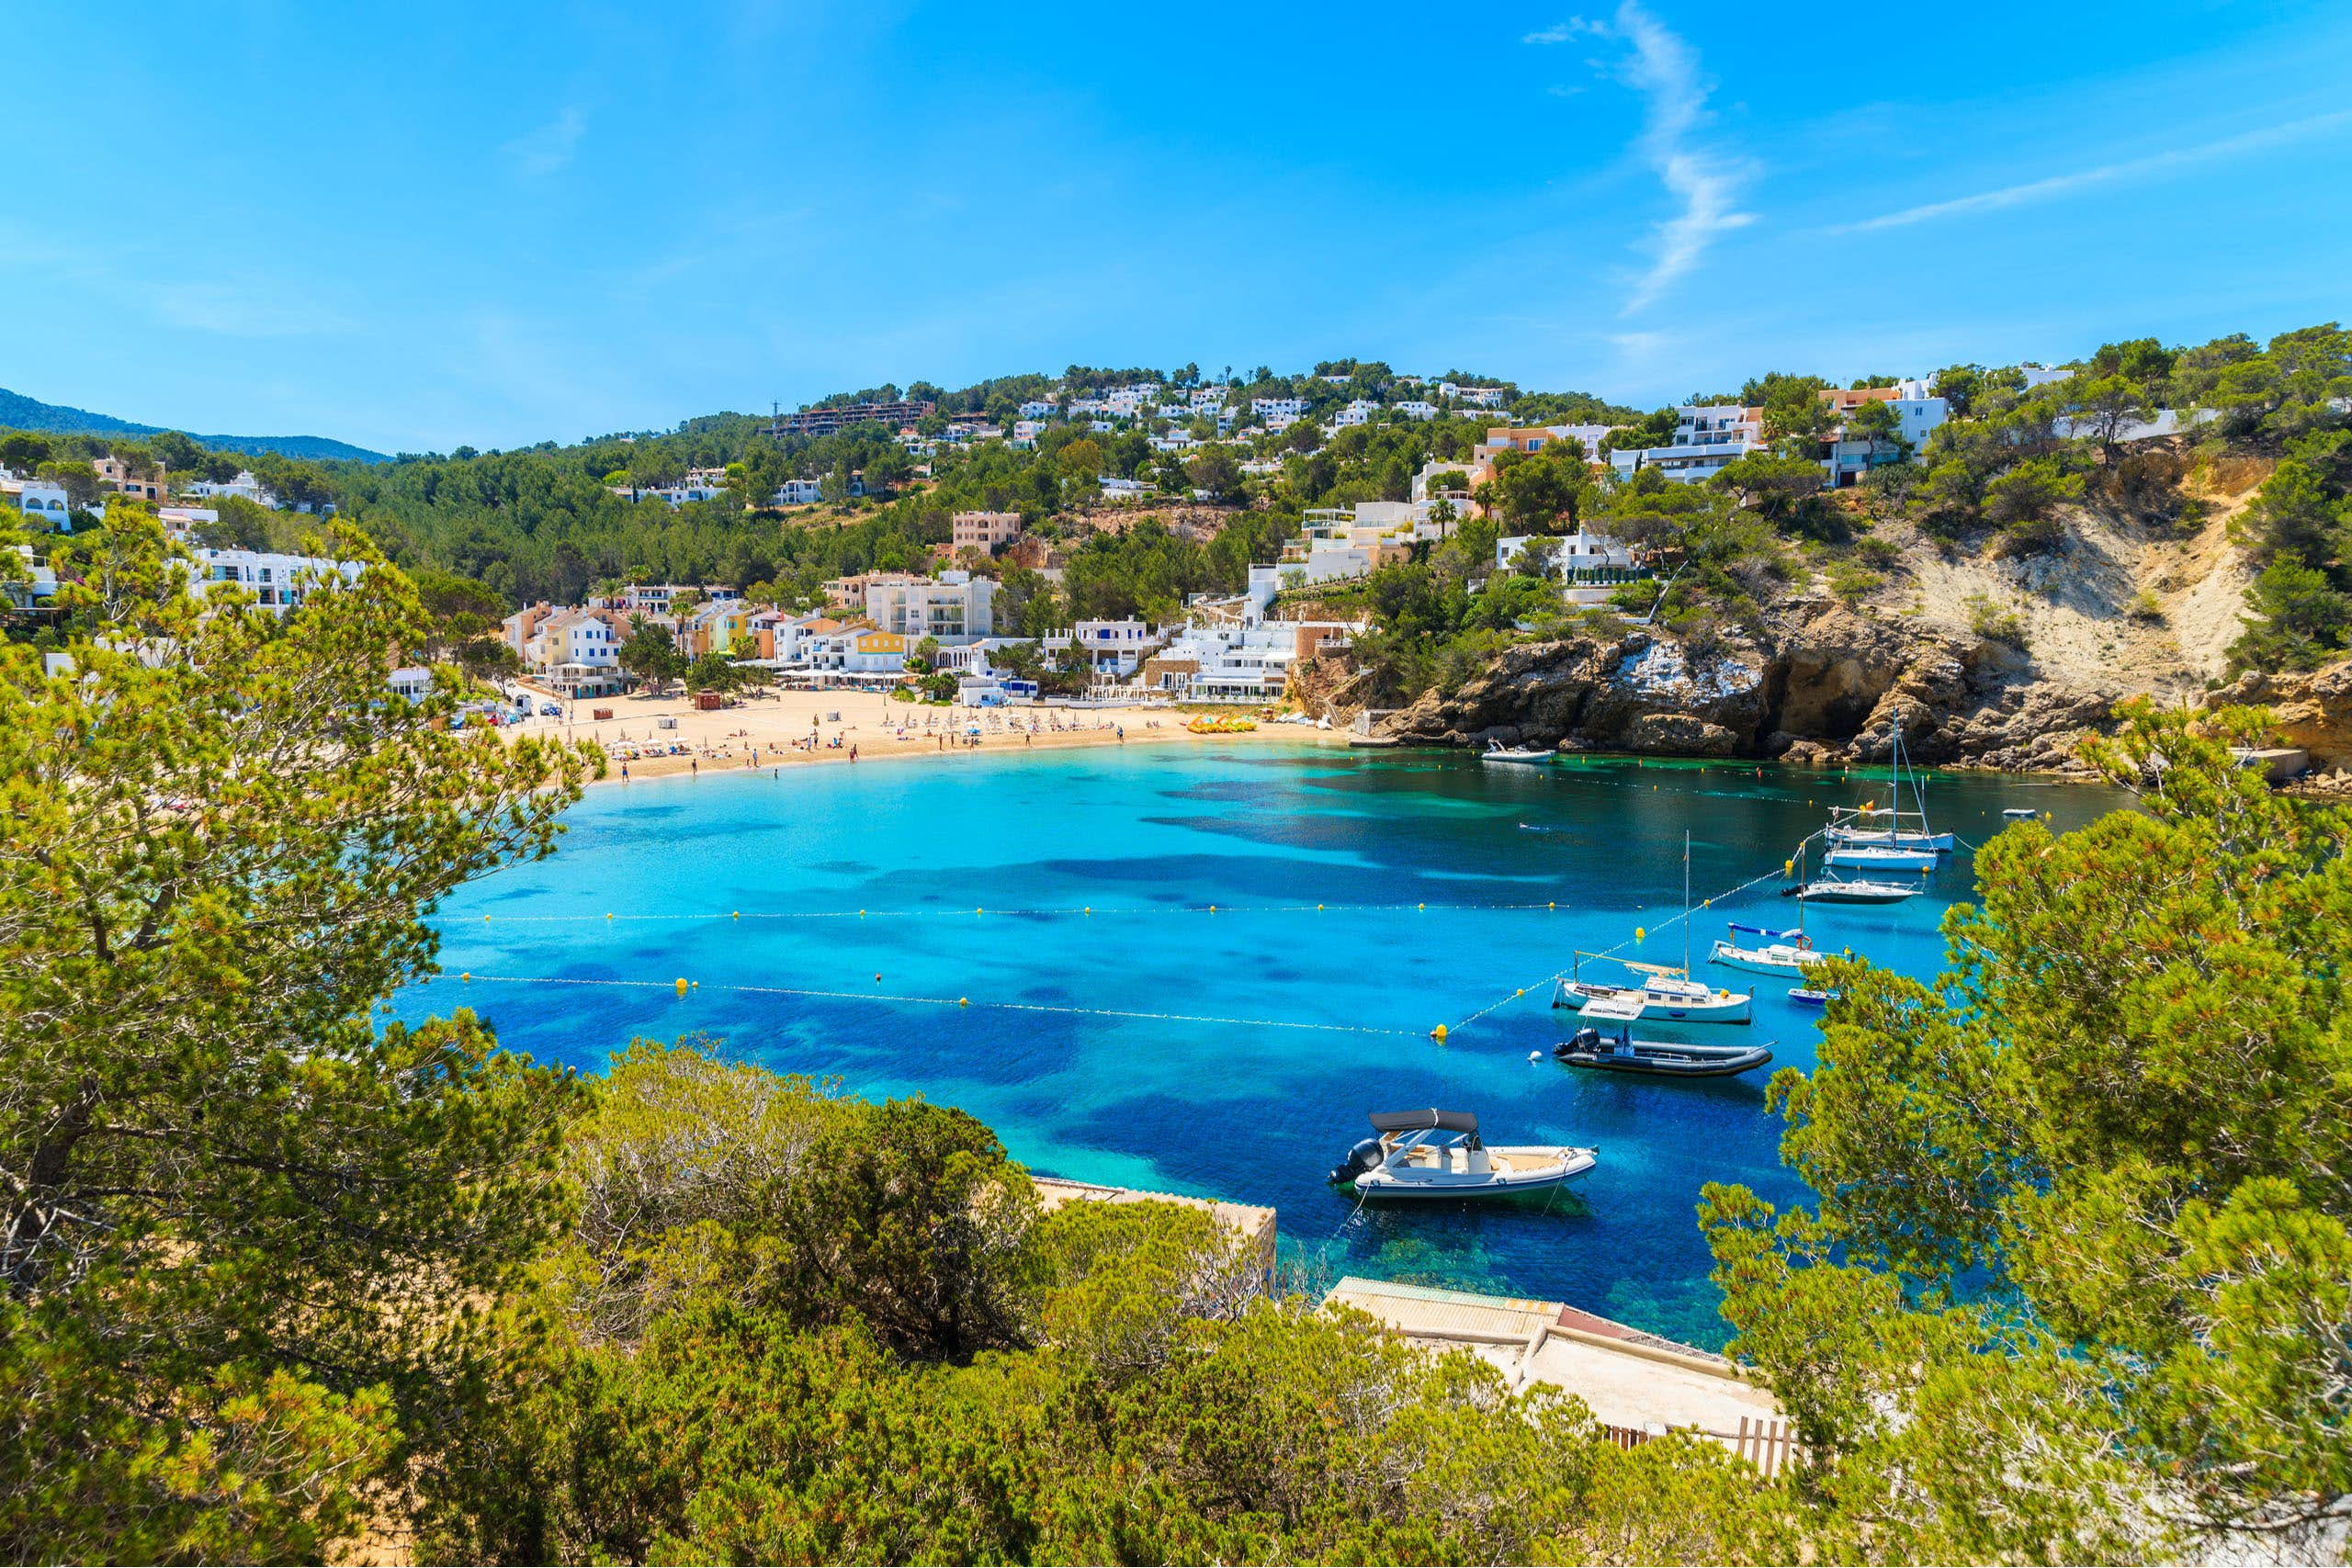 Ibiza Crewed Yacht Charter - Turquoise bay in the wild | Yacht Charter Vacations | Superyacht Rentals | N&J